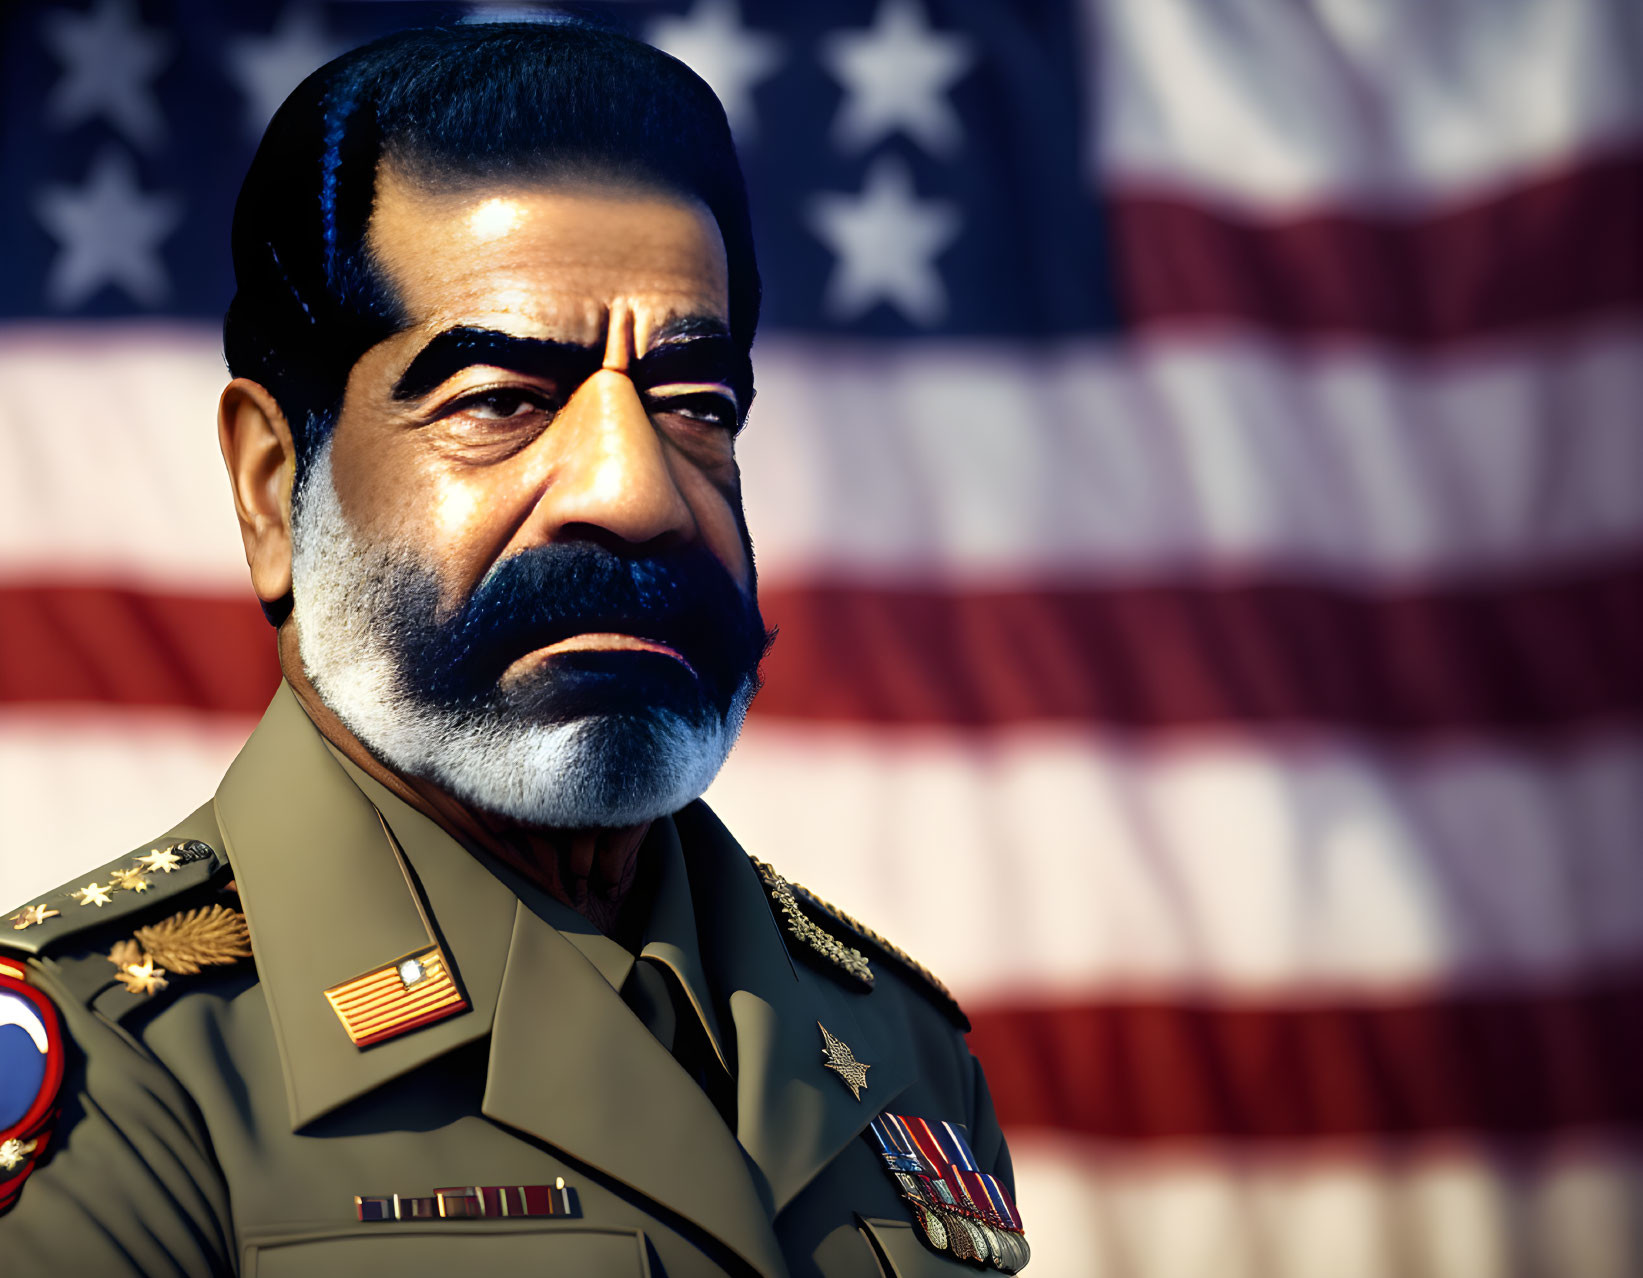 Man with Mustache in Military Attire Against American Flag